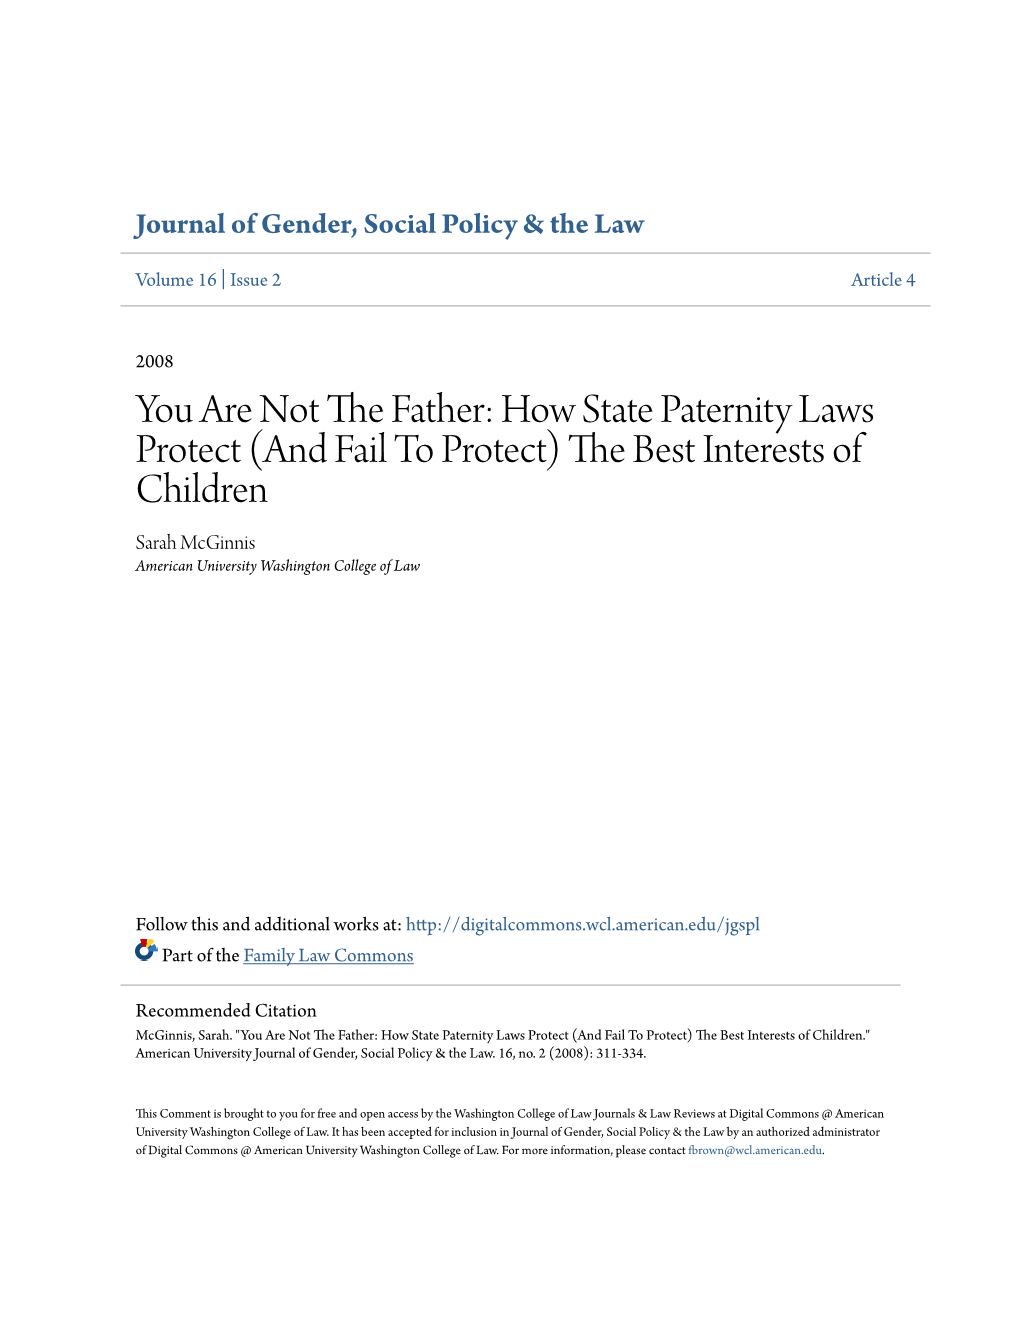 You Are Not the Father: How State Paternity Laws Protect (And Fai